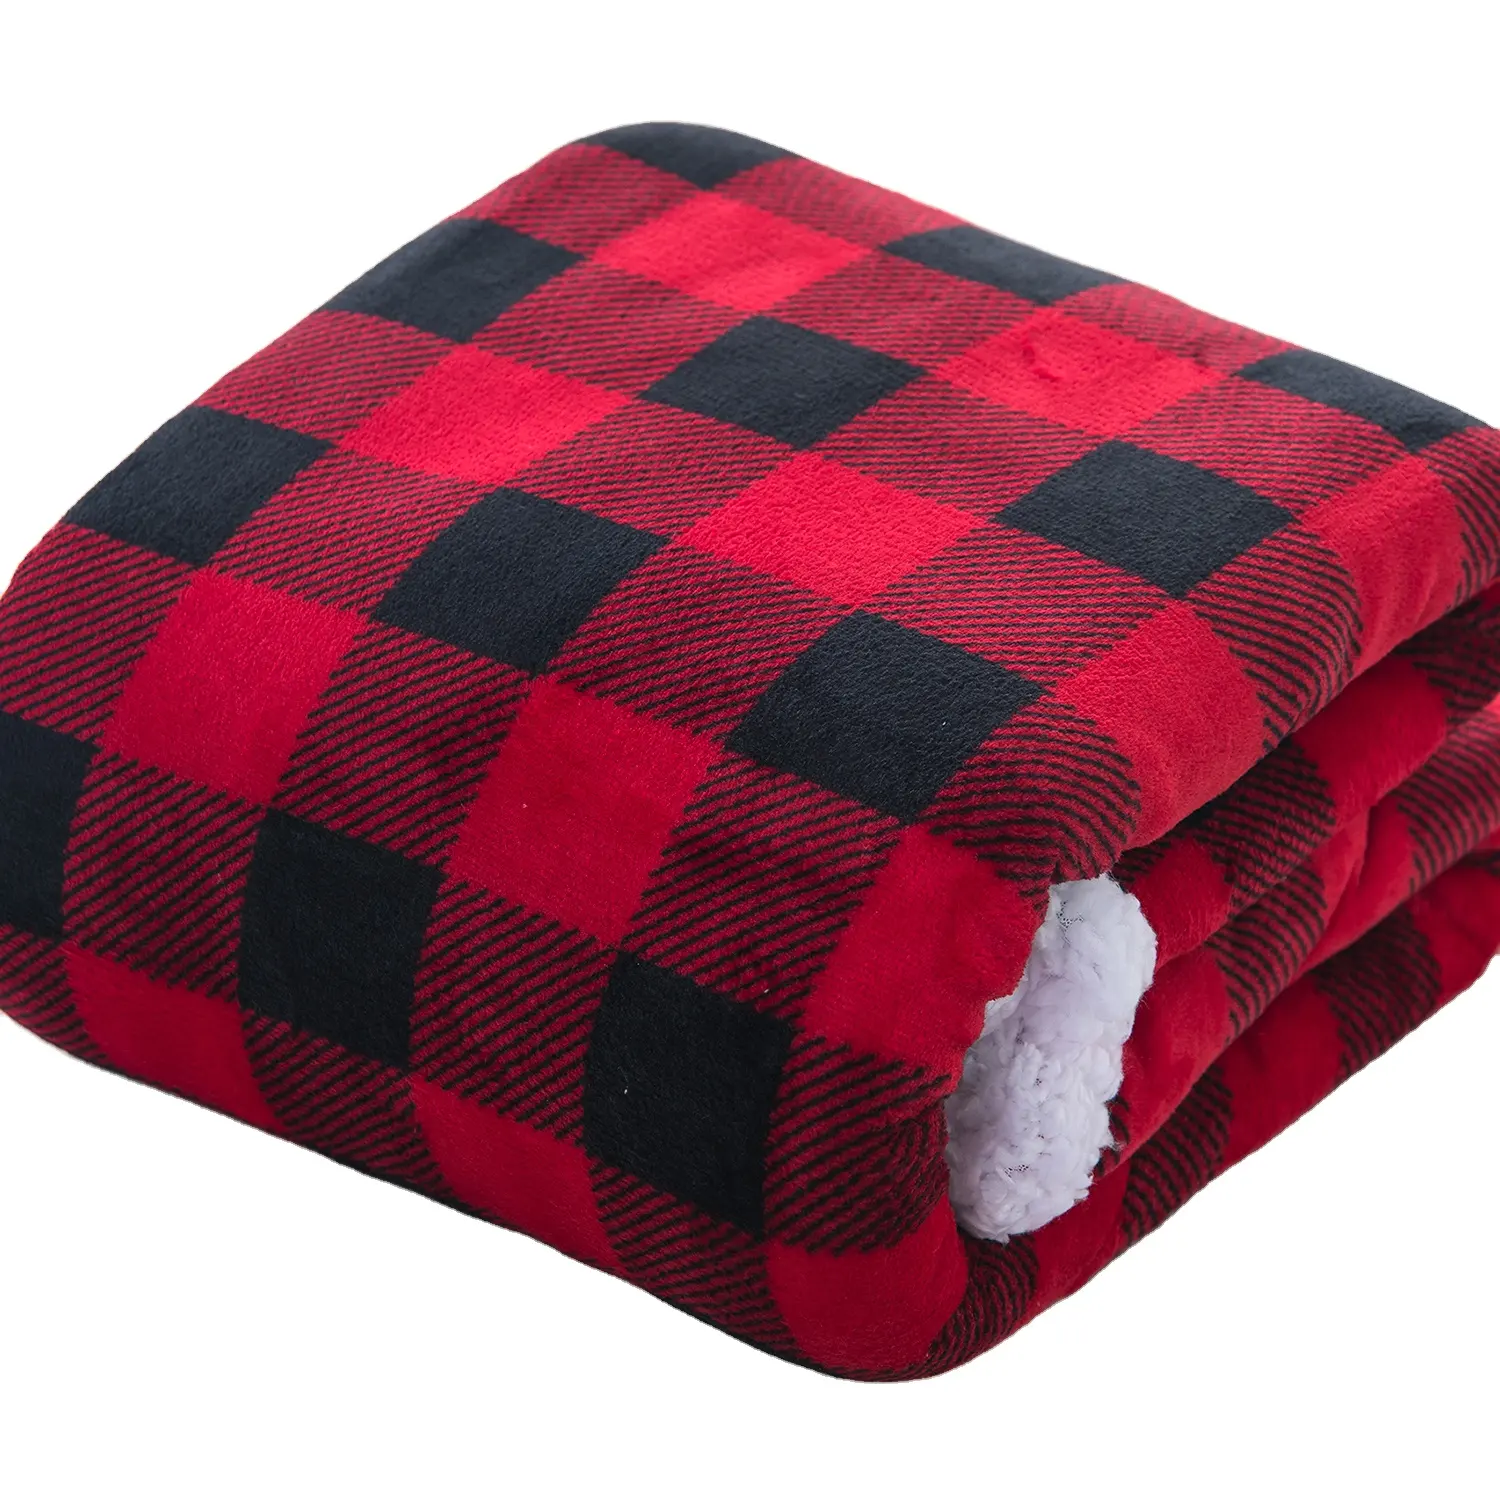 2022 Premium Super Soft Checkered Blanket Flannel Fleece Baby Luxury Knitted Throw Blanket for Home